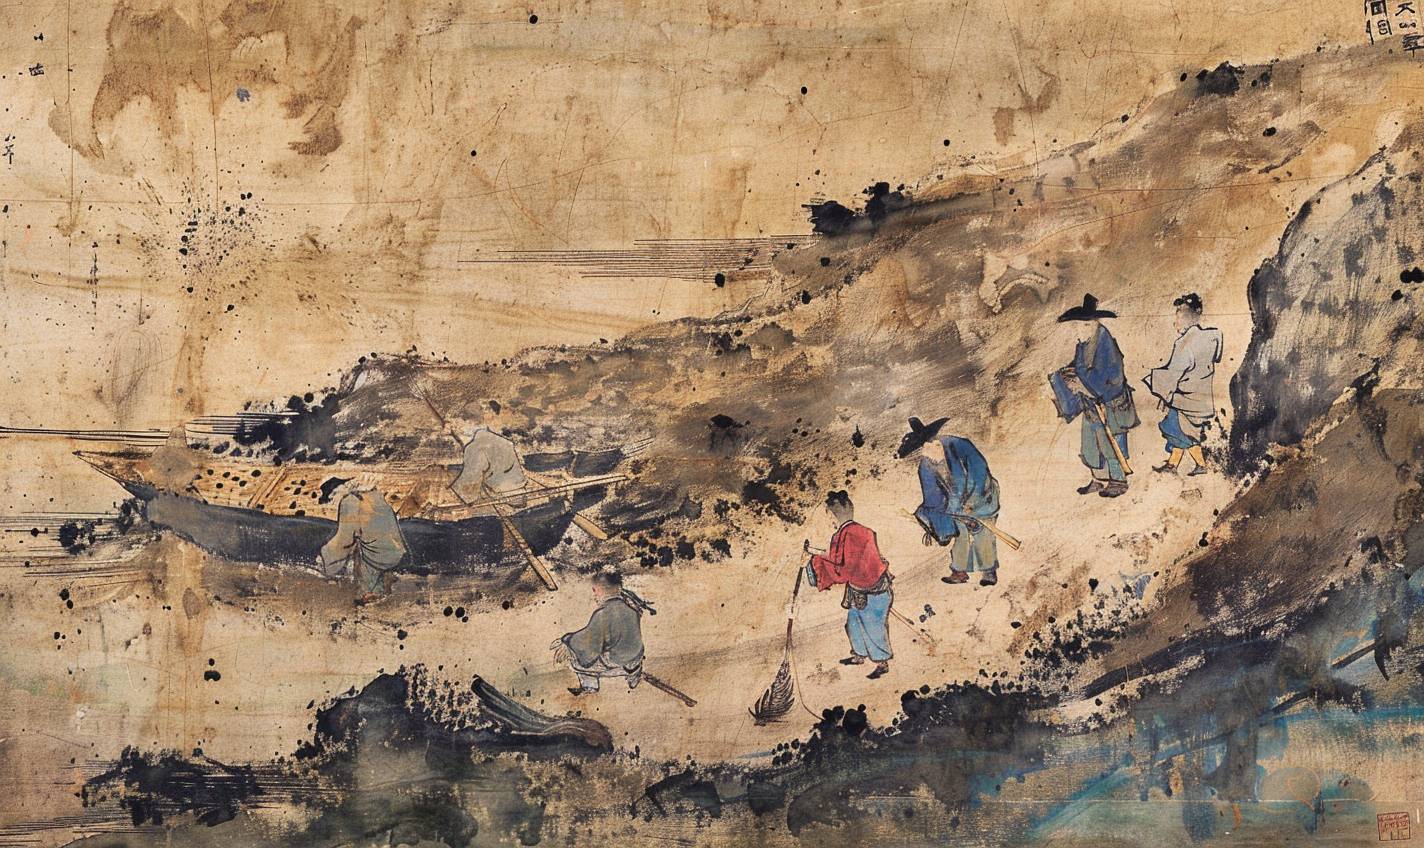 In the style of Qi Baishi, a pirate crew burying treasure on a deserted island